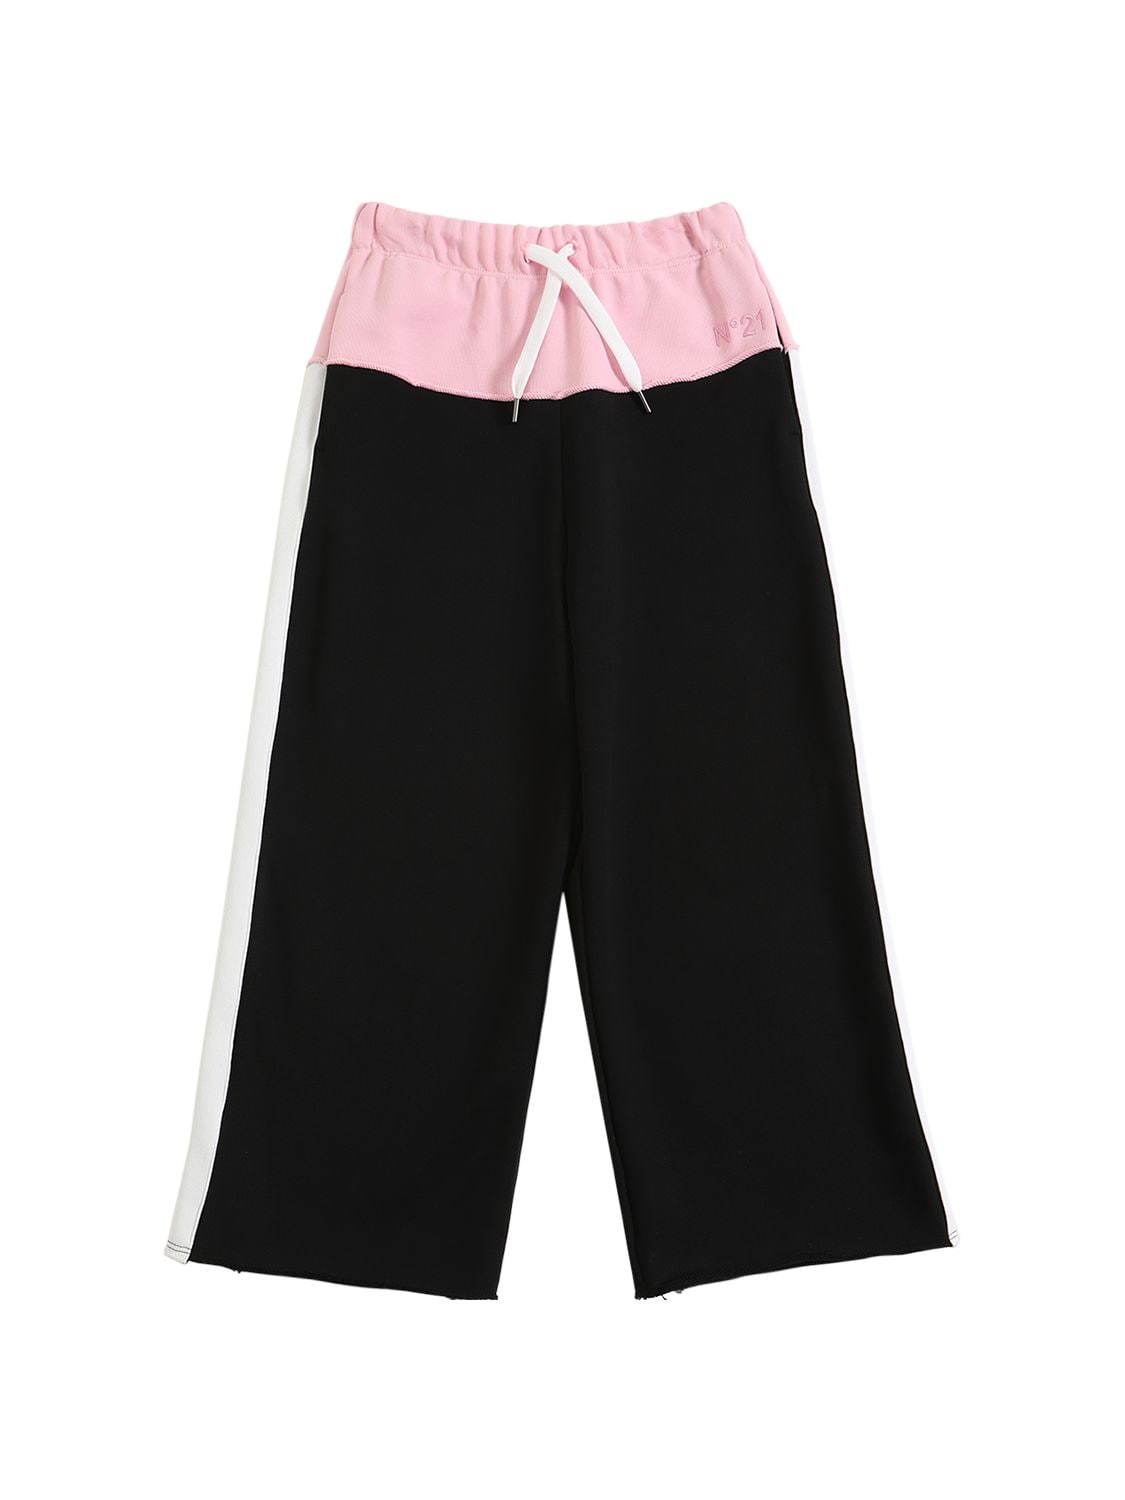 N°21 Kids' Embroidered Logo Cotton Sweatpants In Black,pink